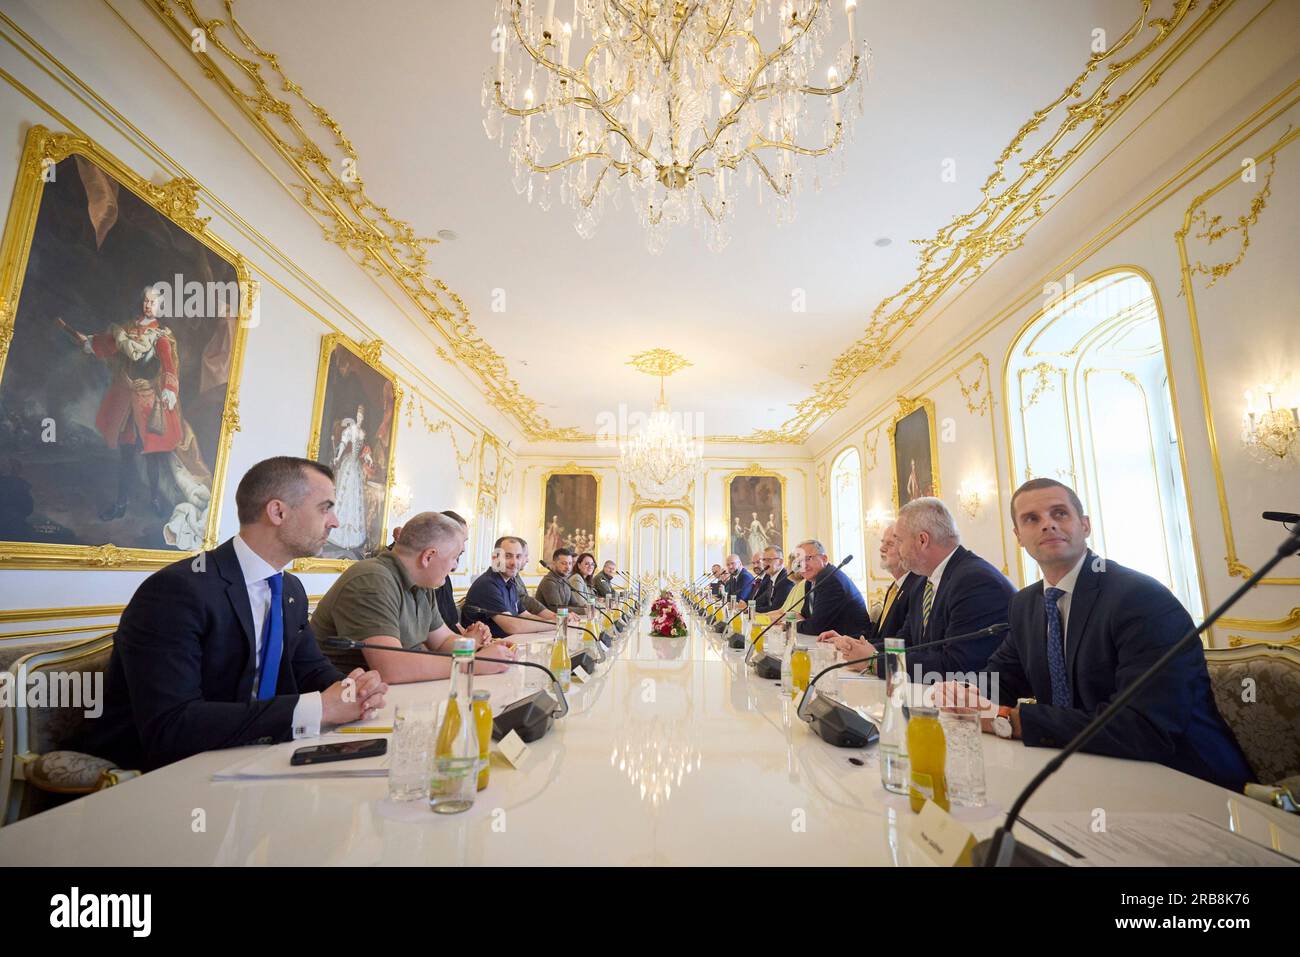 Bratislava, Slovakia. 07th July, 2023. Slovak National Council chair Borys Kollar and Slovak parliamentarians, right, before the start of an expanded bilateral meeting with Ukrainian President Volodymyr Zelenskyy, left center, and delegation at the Grassalkovich palace, July 7, 2023 in Bratislava, Slovakia. Credit: Ukraine Presidency/Ukraine Presidency/Alamy Live News Stock Photo